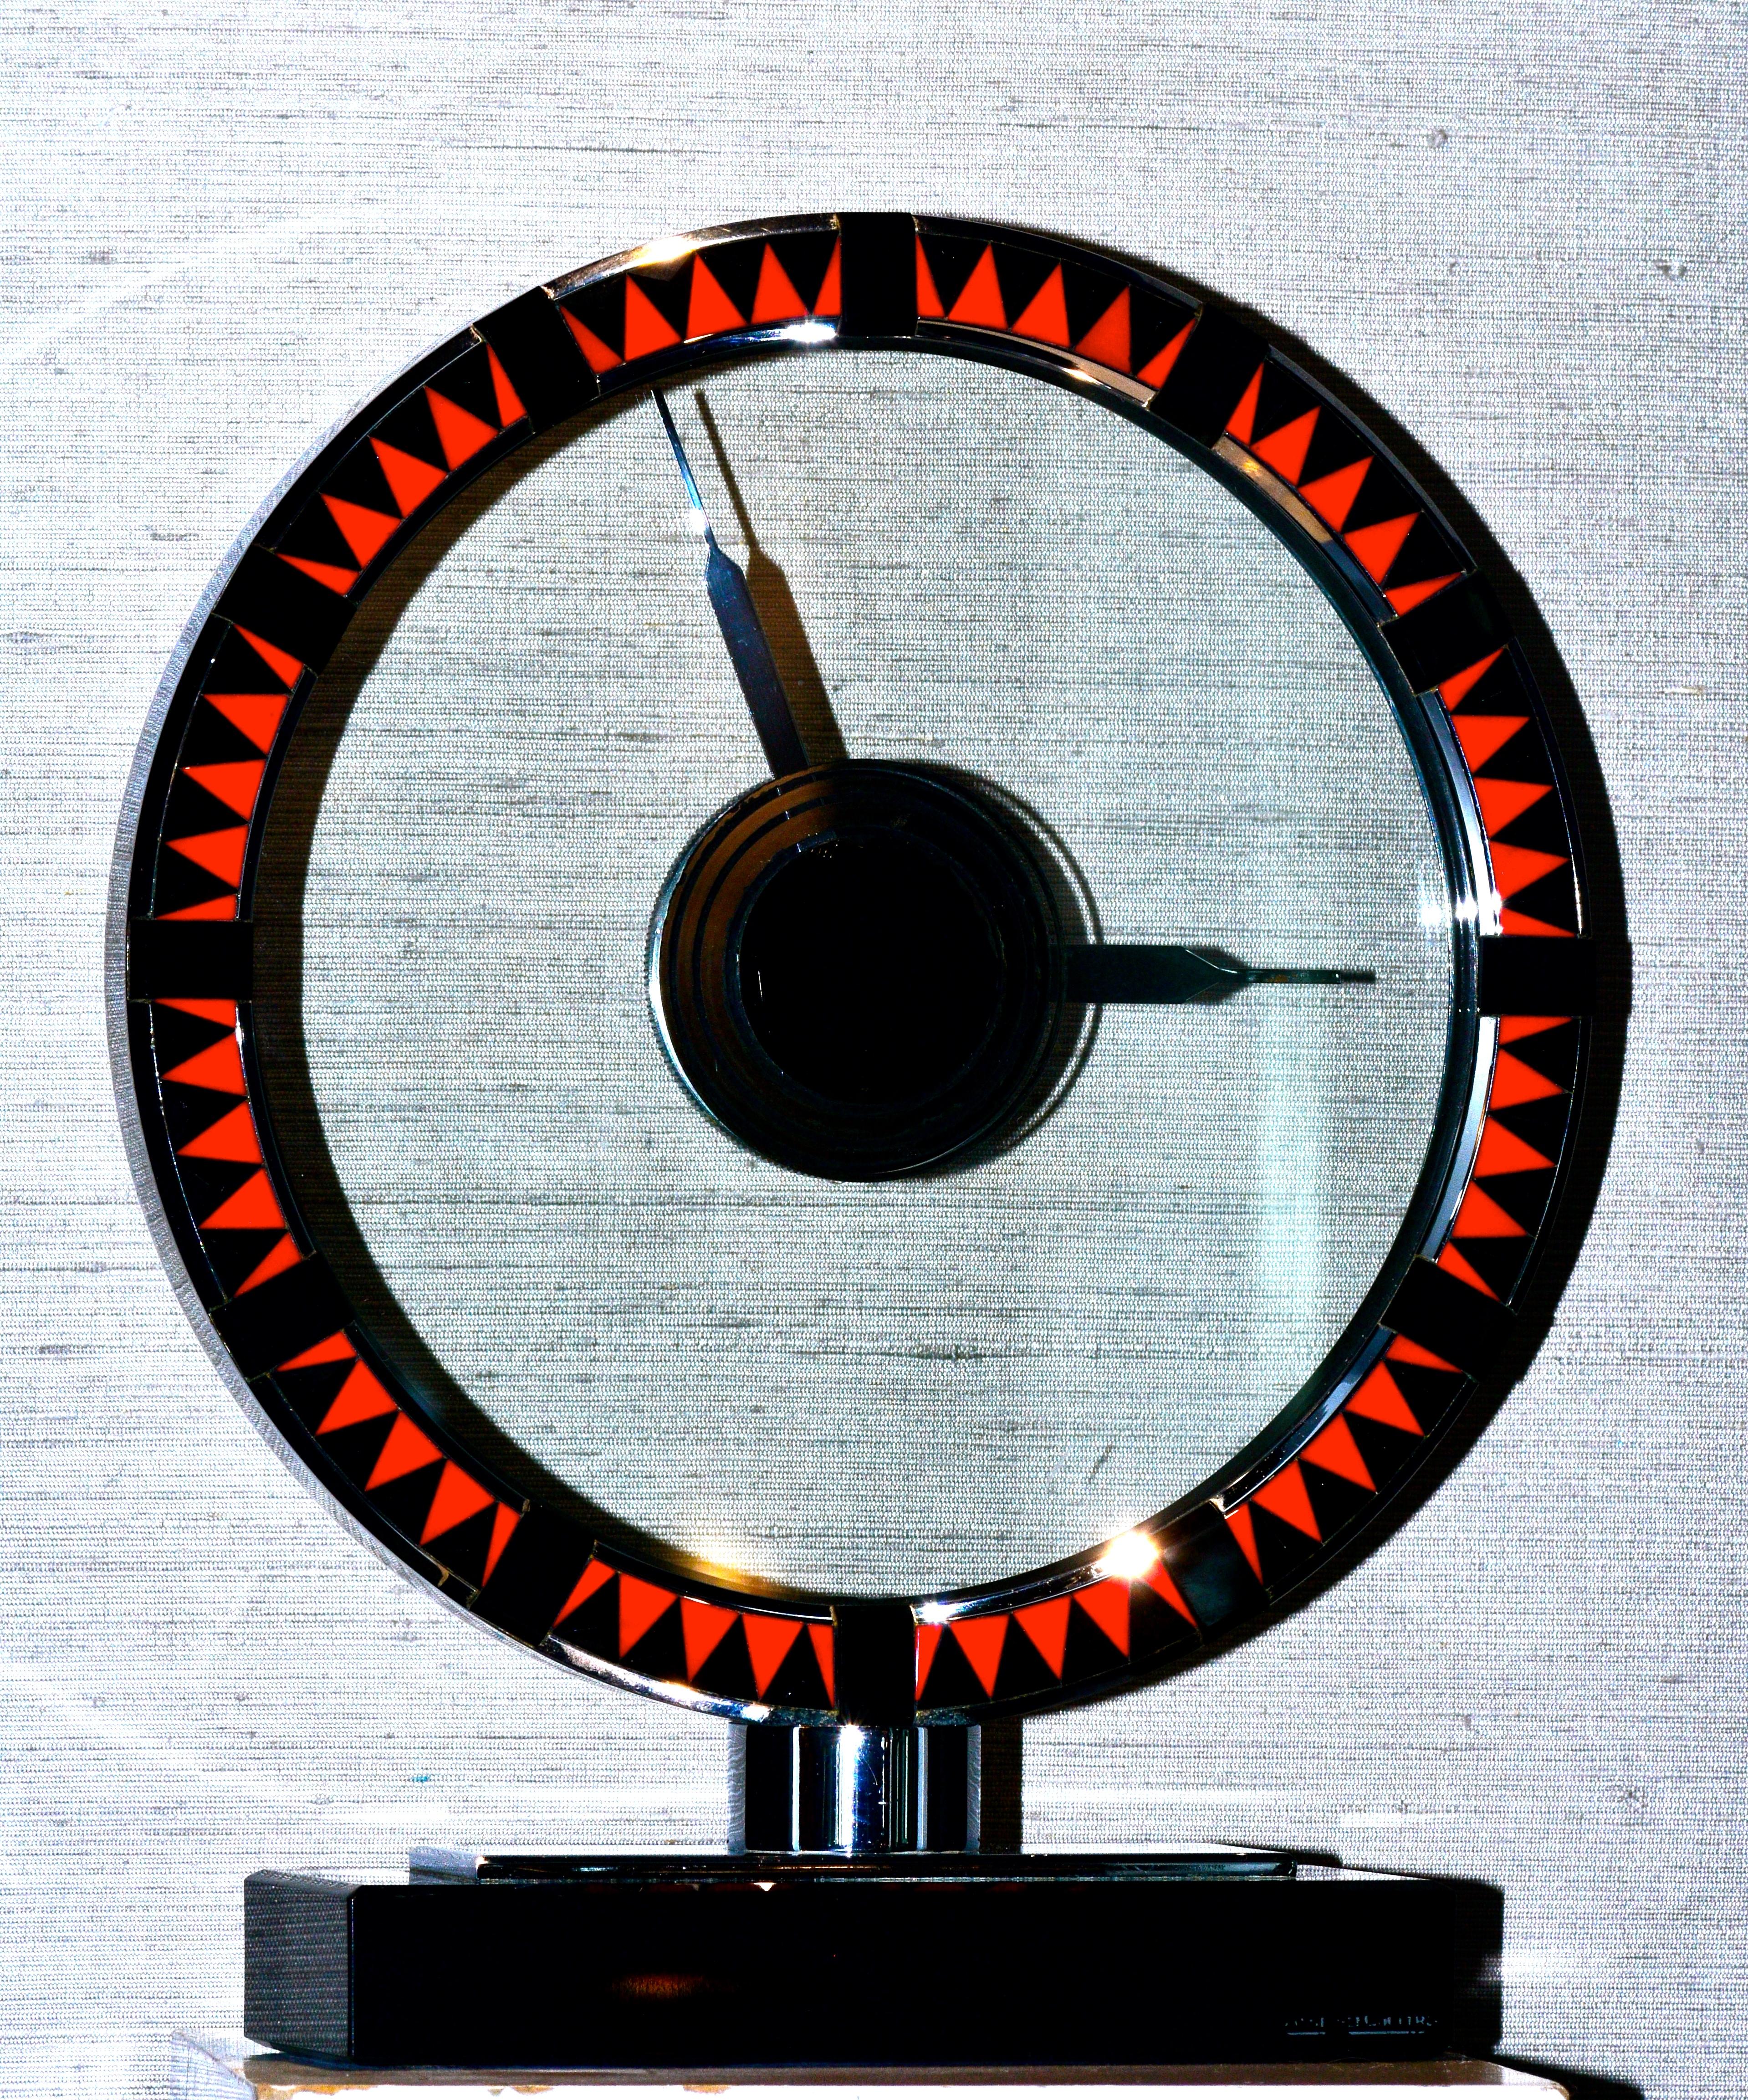 French Cut Art Deco Clock by Jaeger-LeCoultre, circa 1930-1940